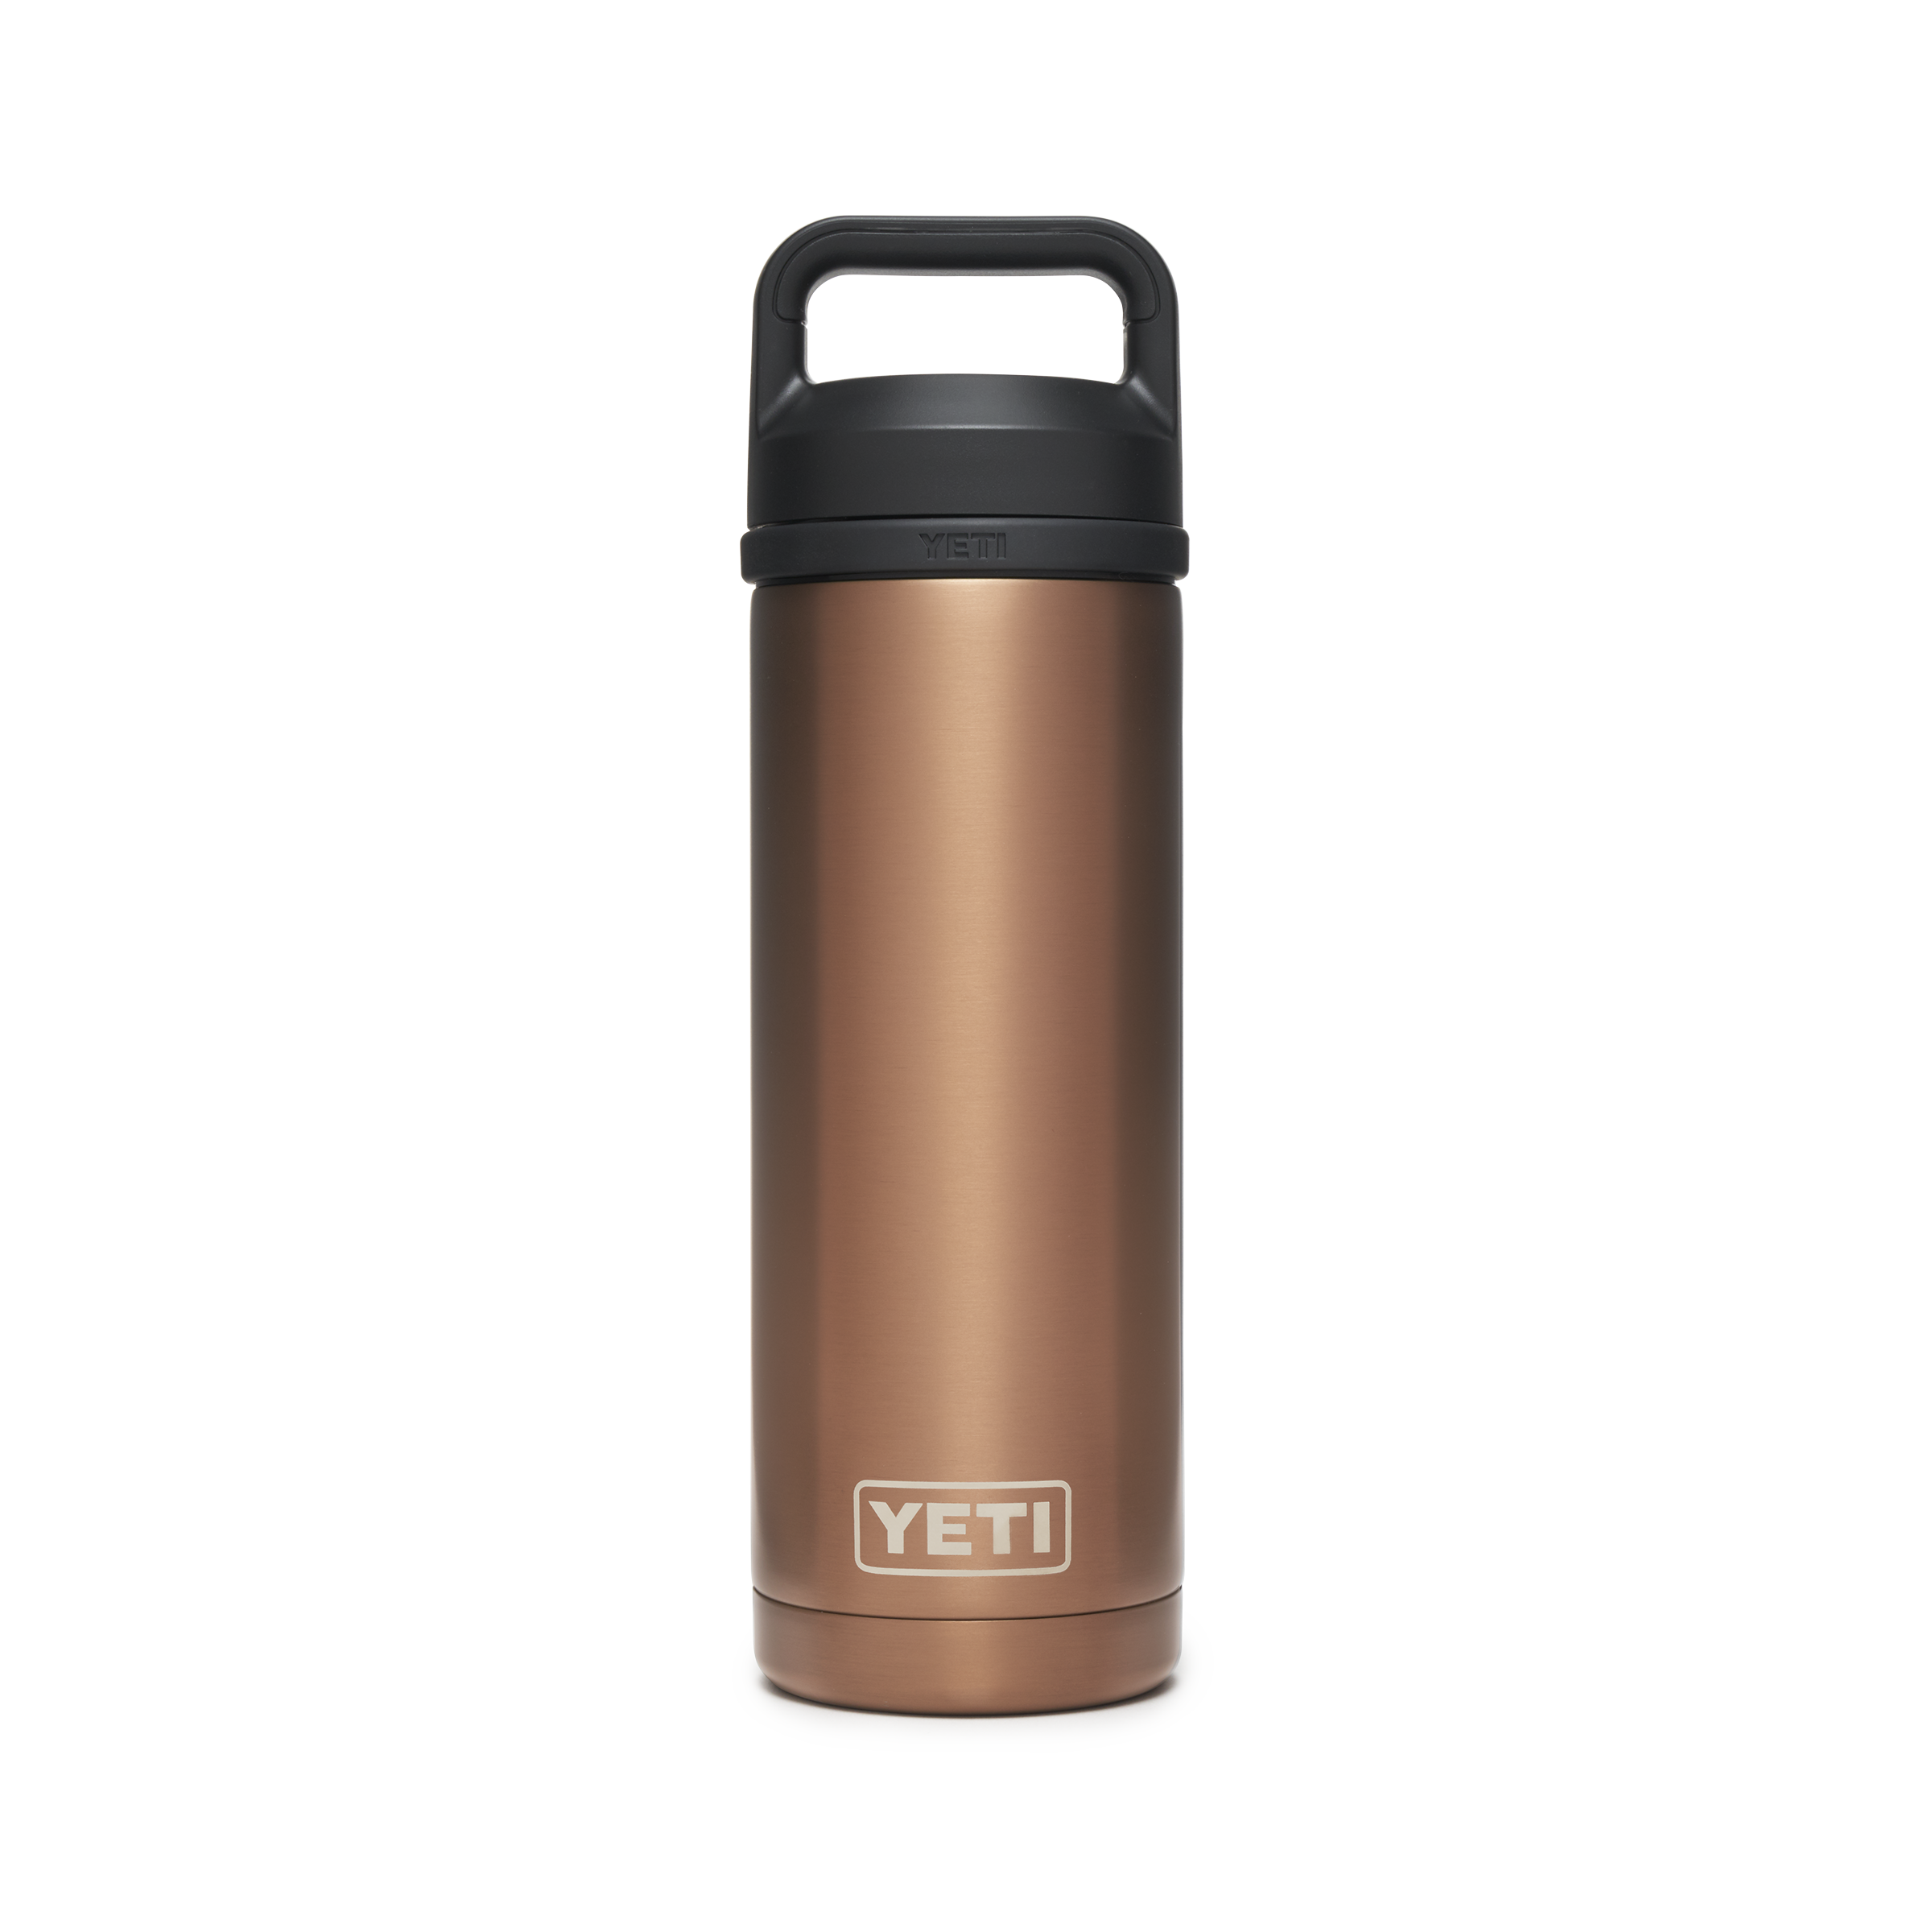 Yeti Rambler 26 oz Water Bottle with chug cap - copper - limited edition!